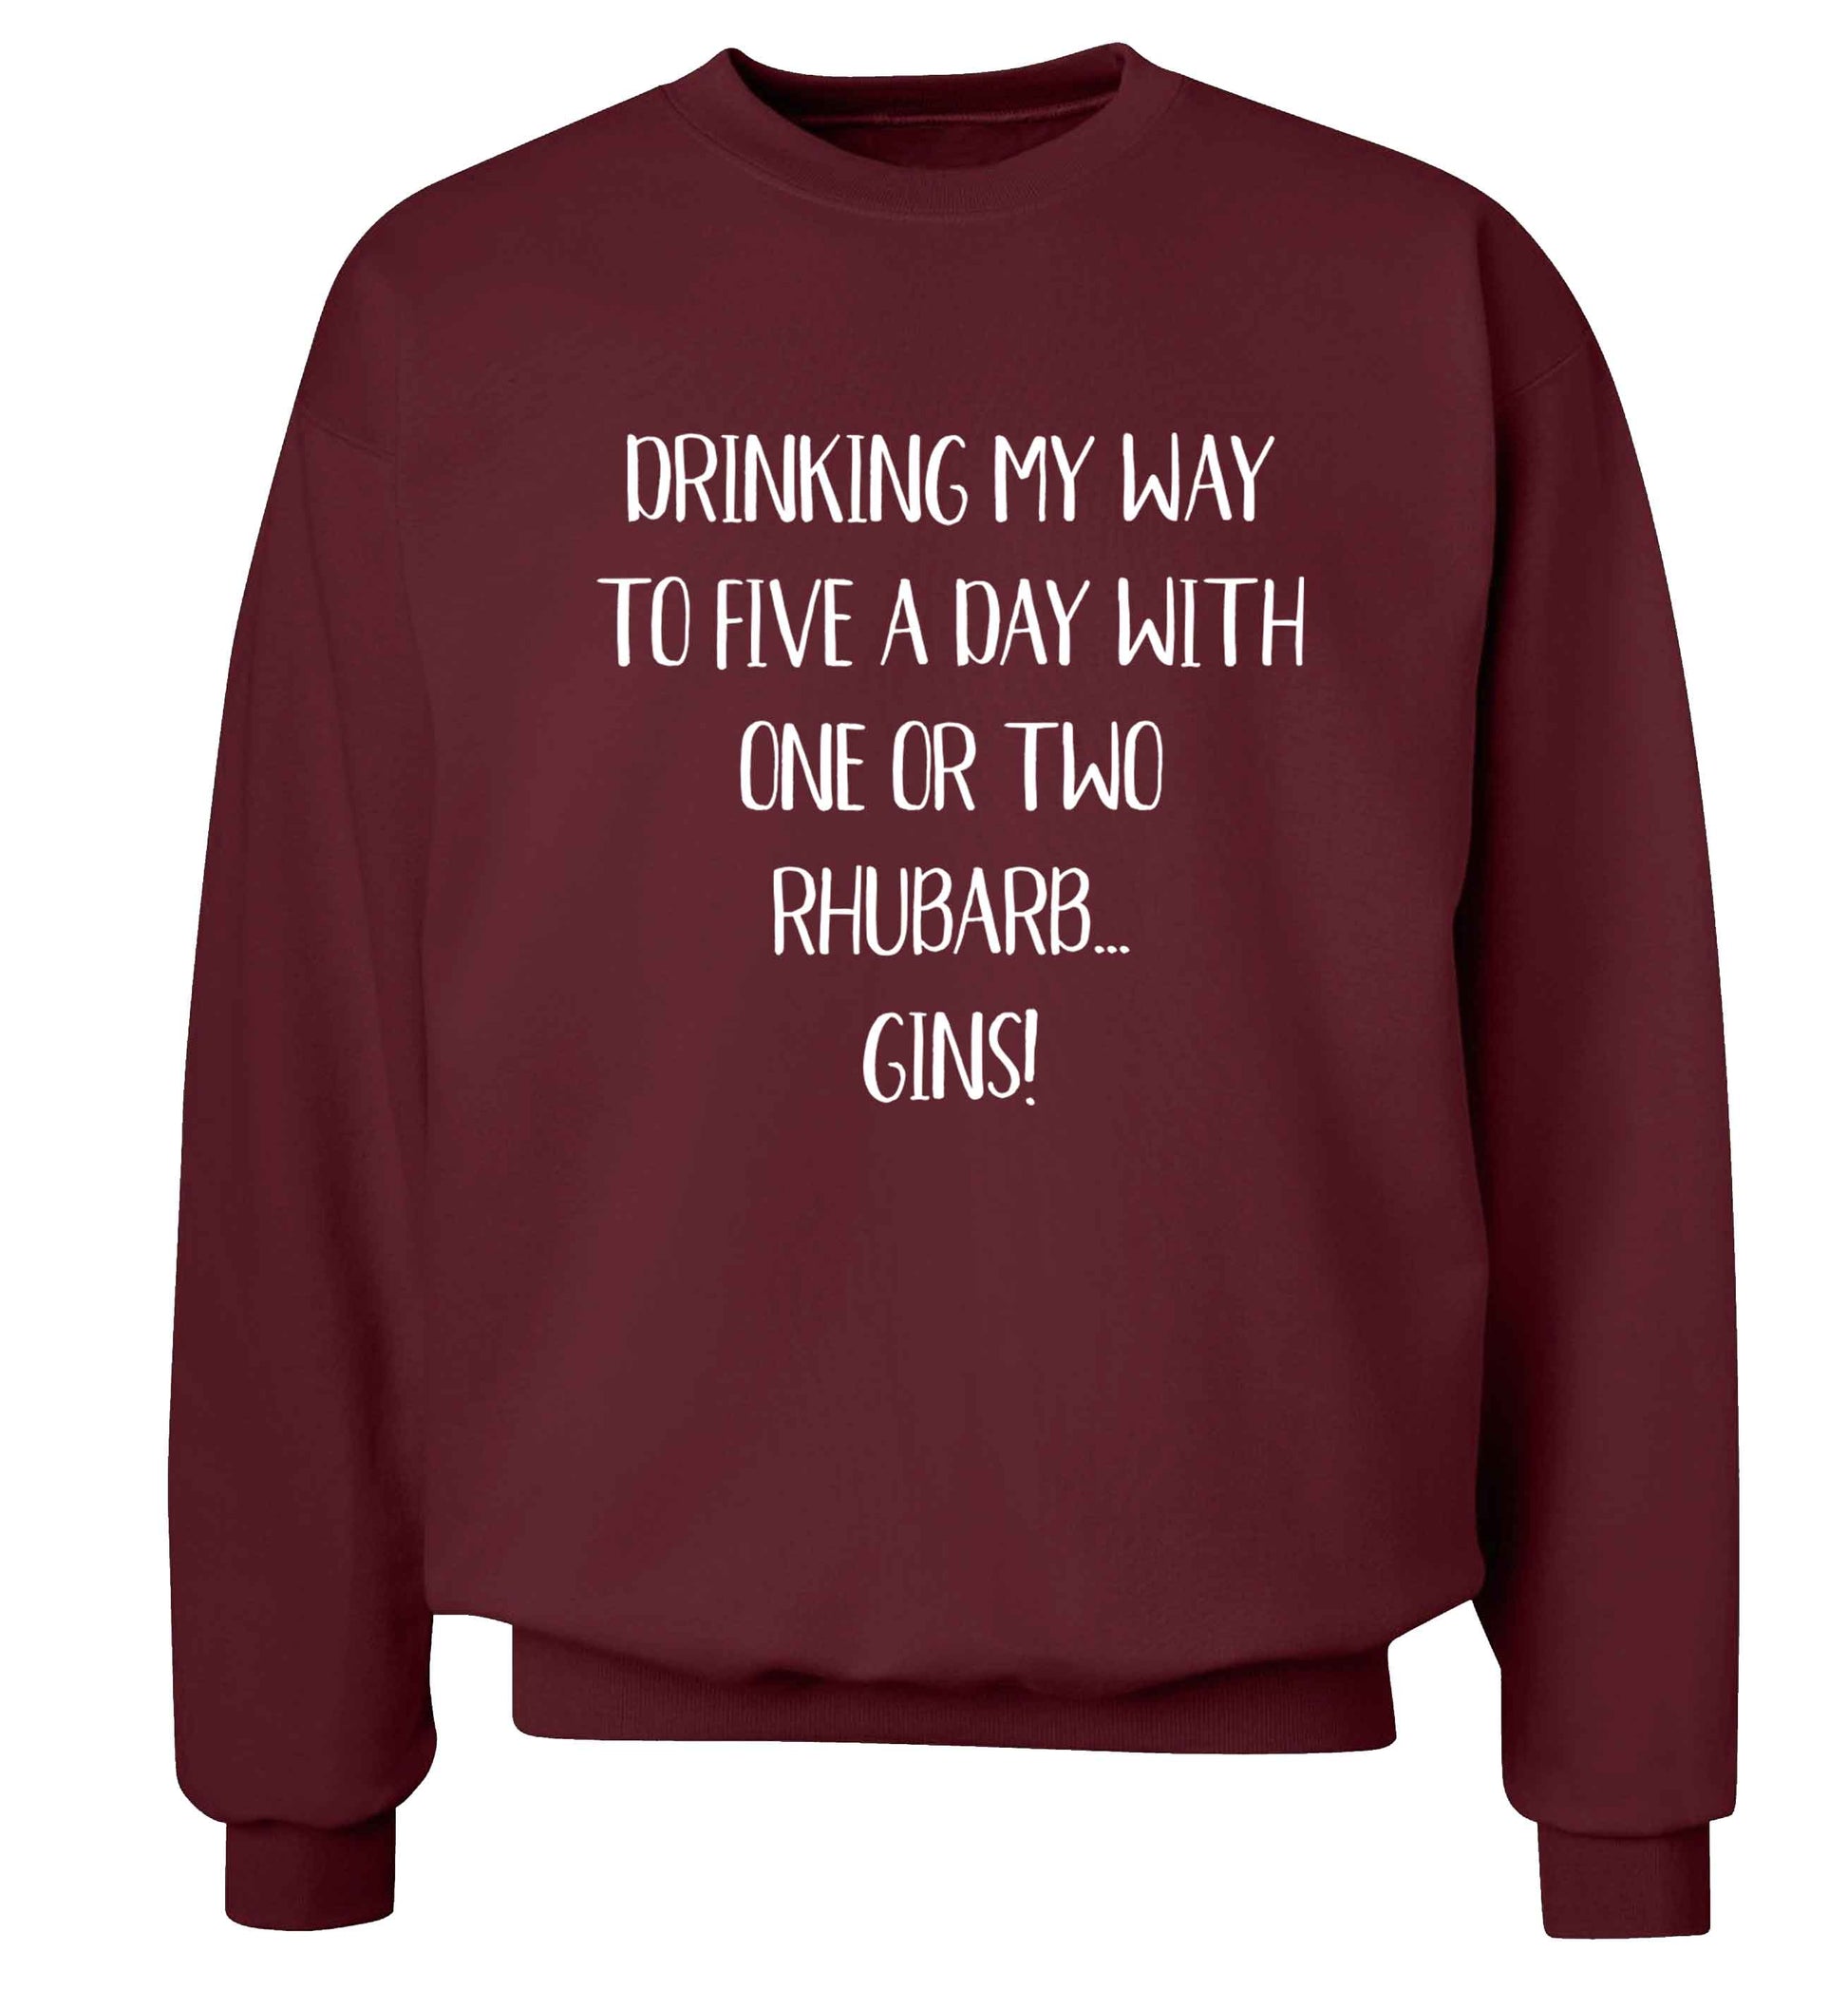 Drinking my way to five a day with one or two rhubarb gins Adult's unisex maroon Sweater 2XL